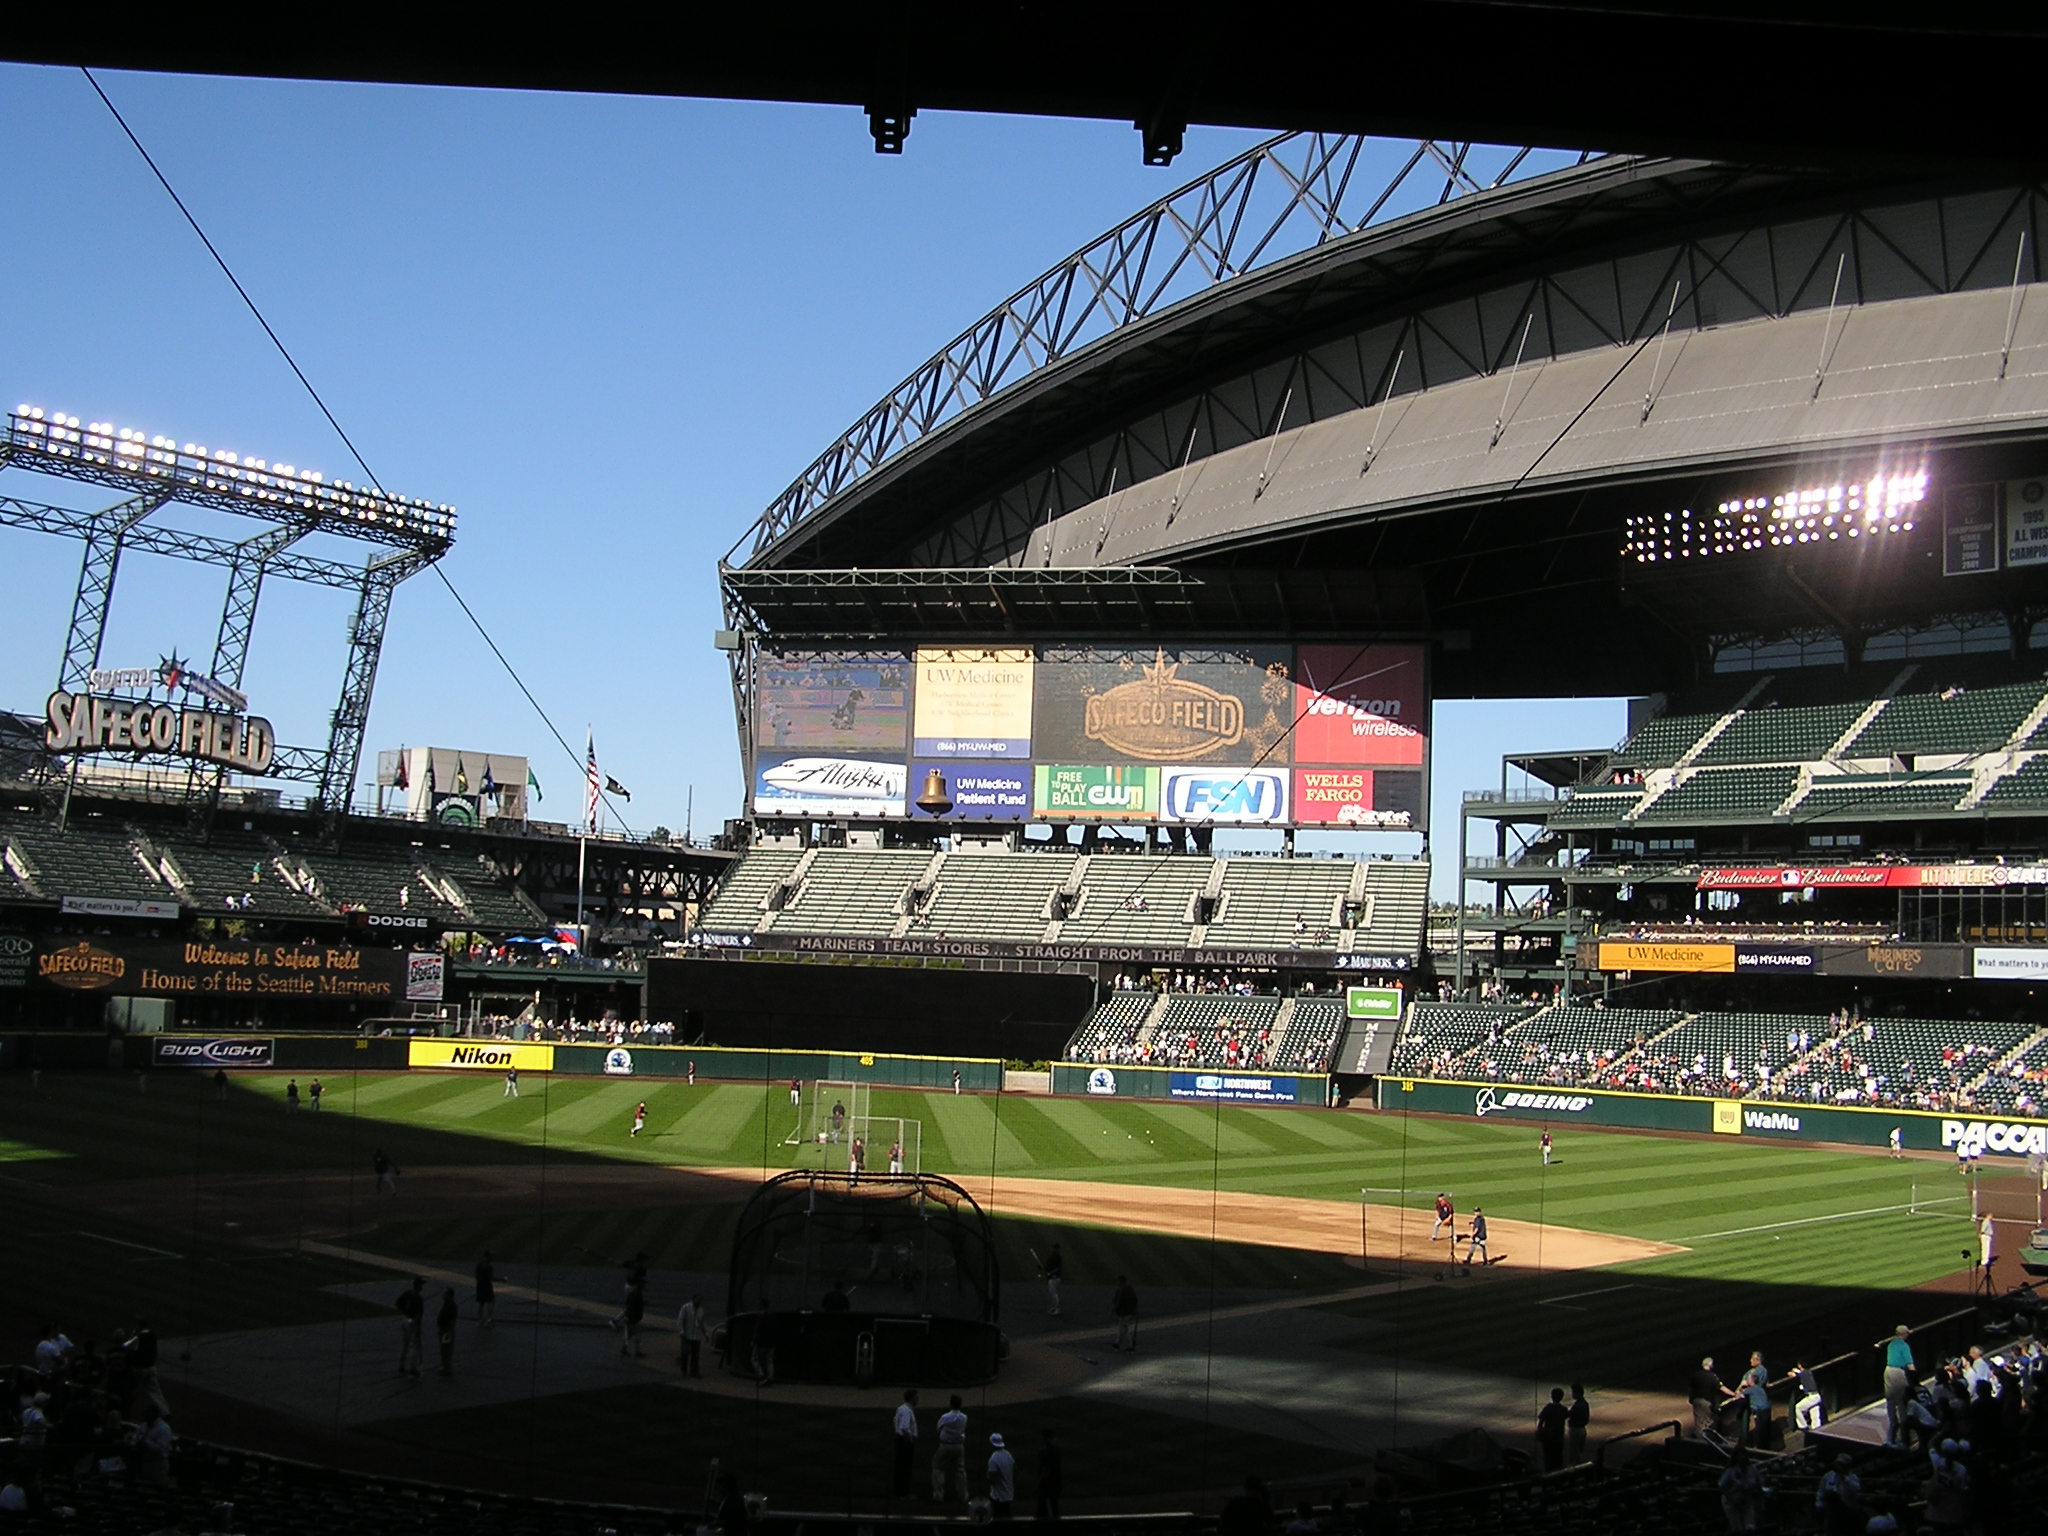 My first view of Safeco Field, Seattle Wa